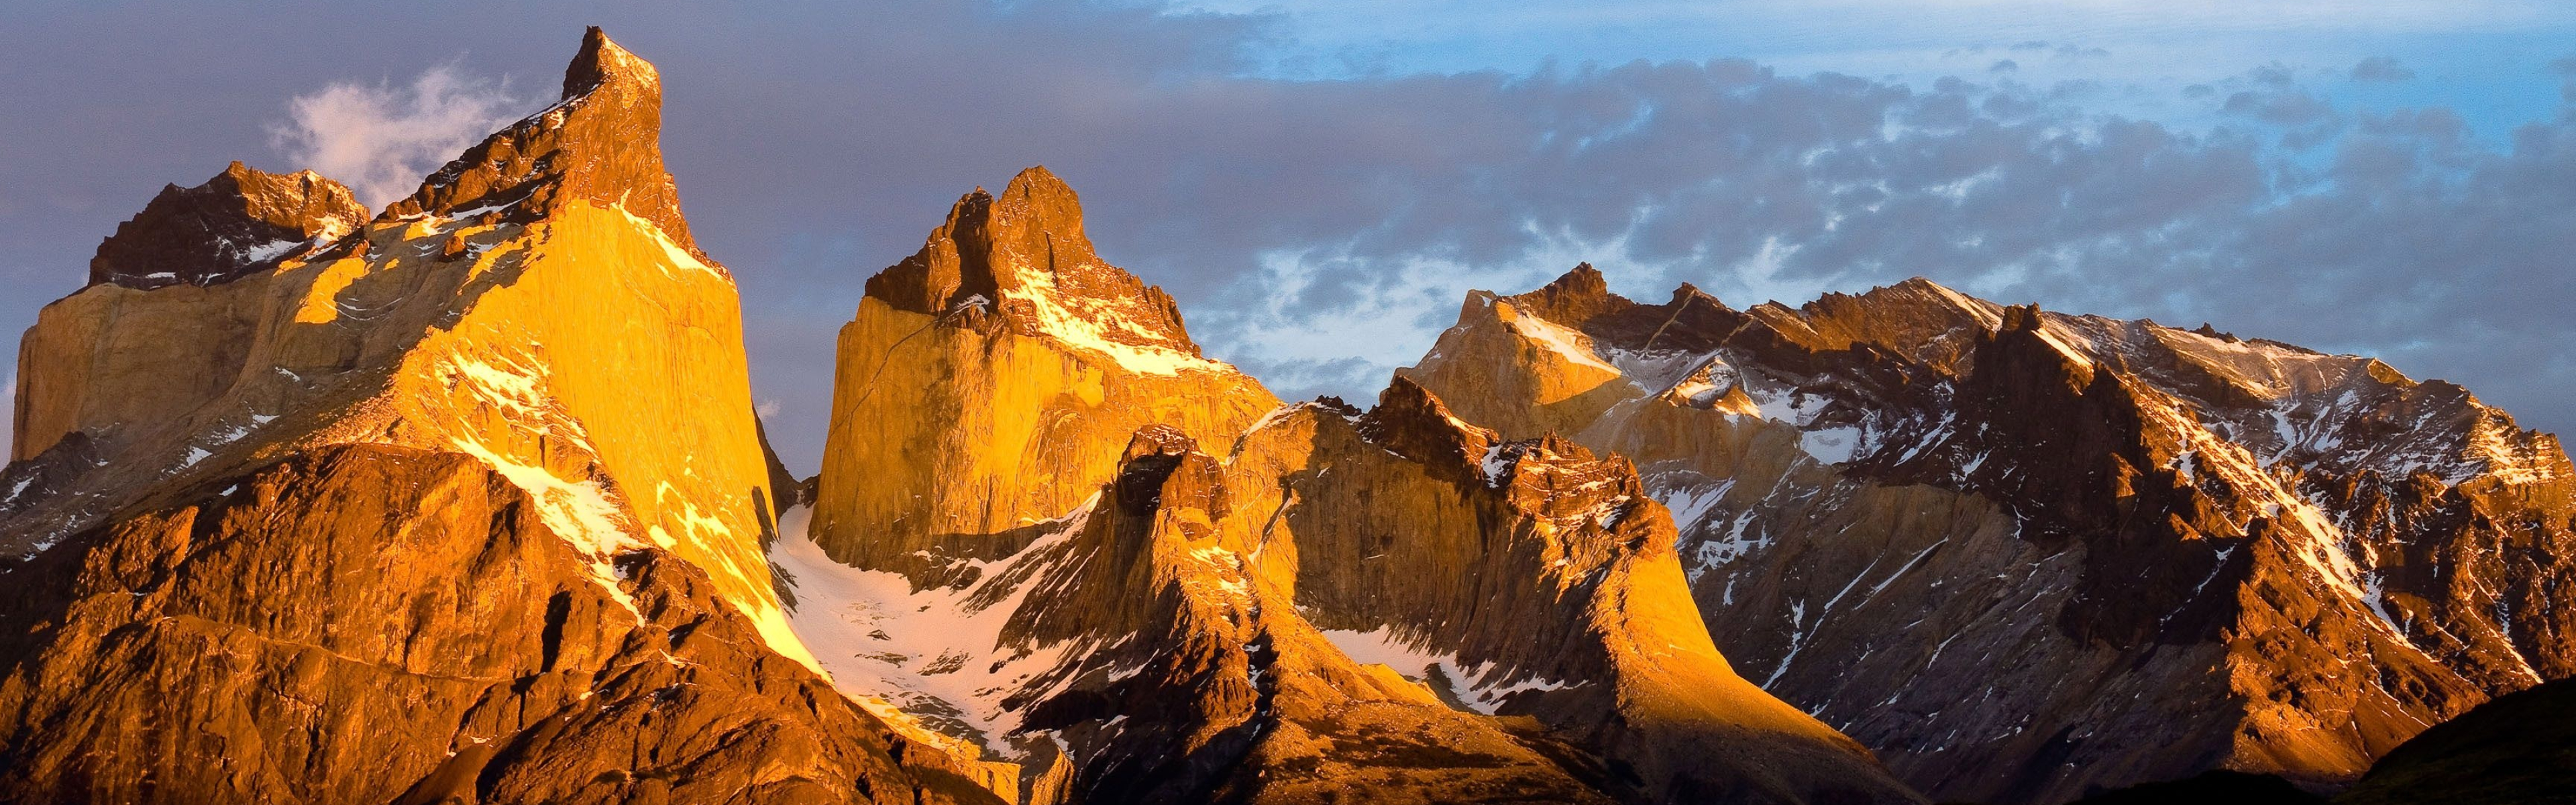 Chile: Patagonia, Spain conquered and colonized the region in the mid-16th century. 3840x1200 Dual Screen Background.